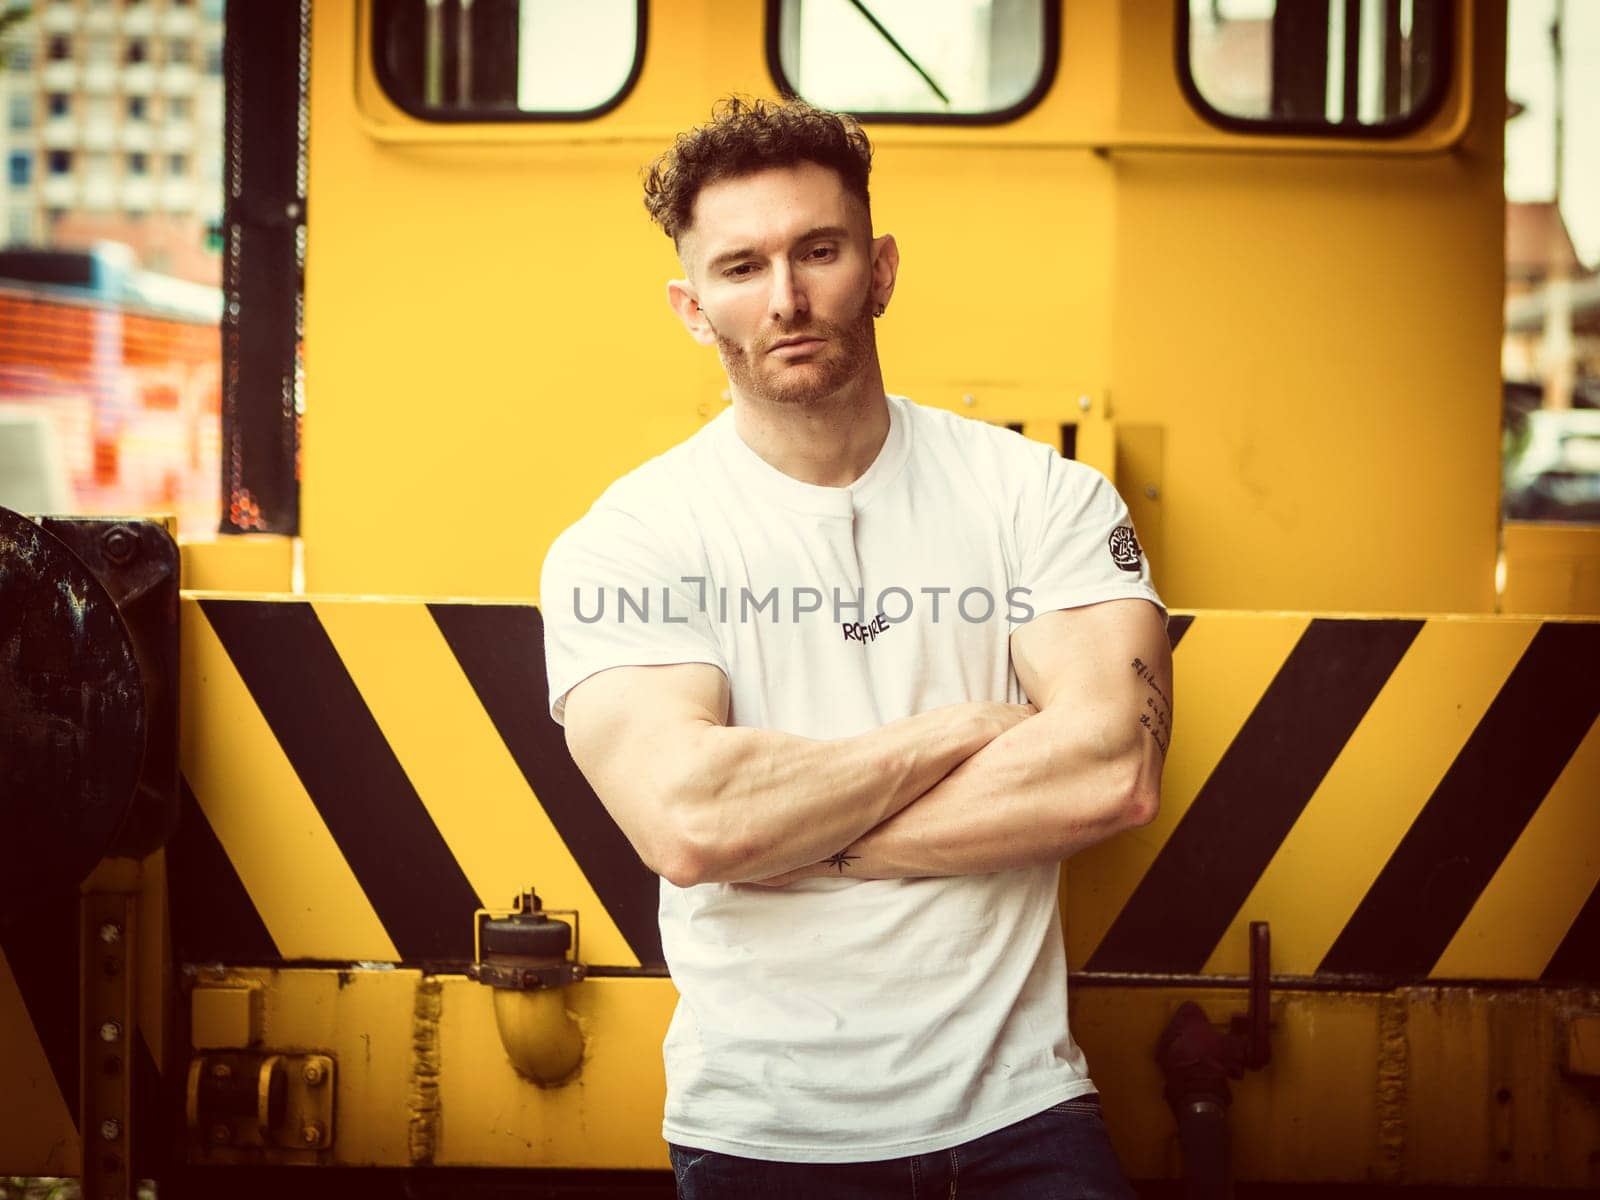 A man standing in front of a yellow train